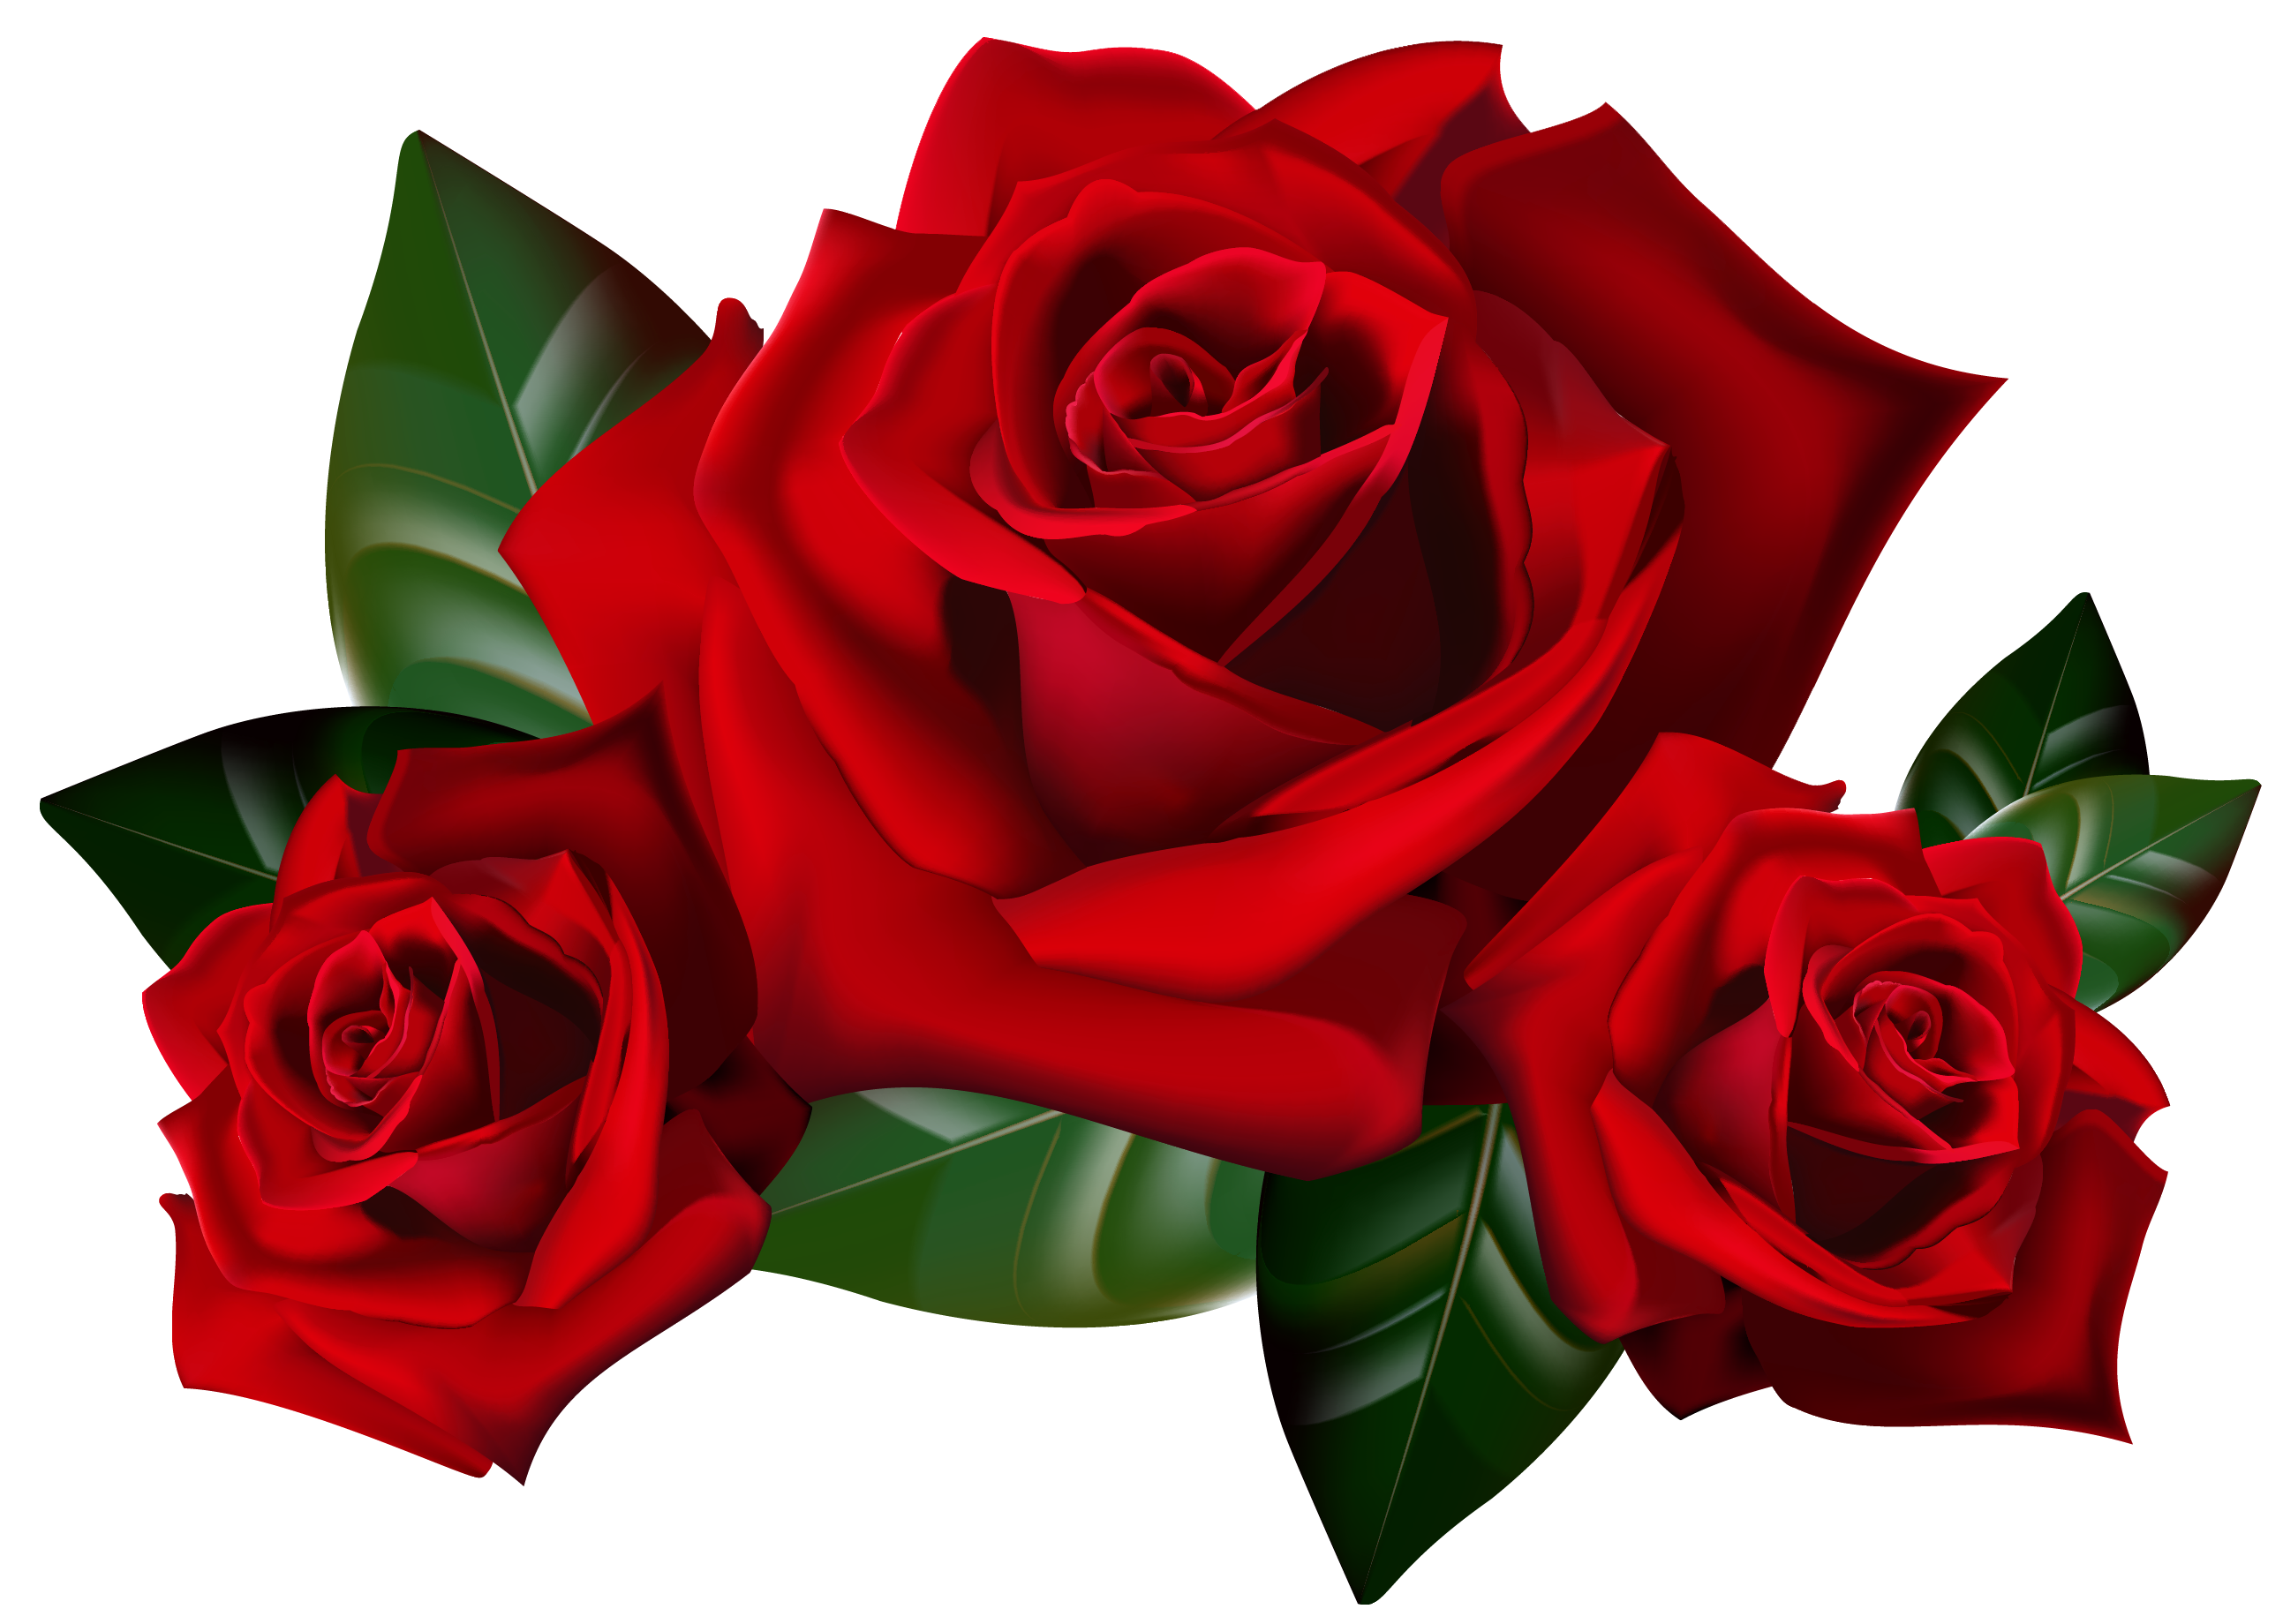 Red Roses PNG Clipart Picture